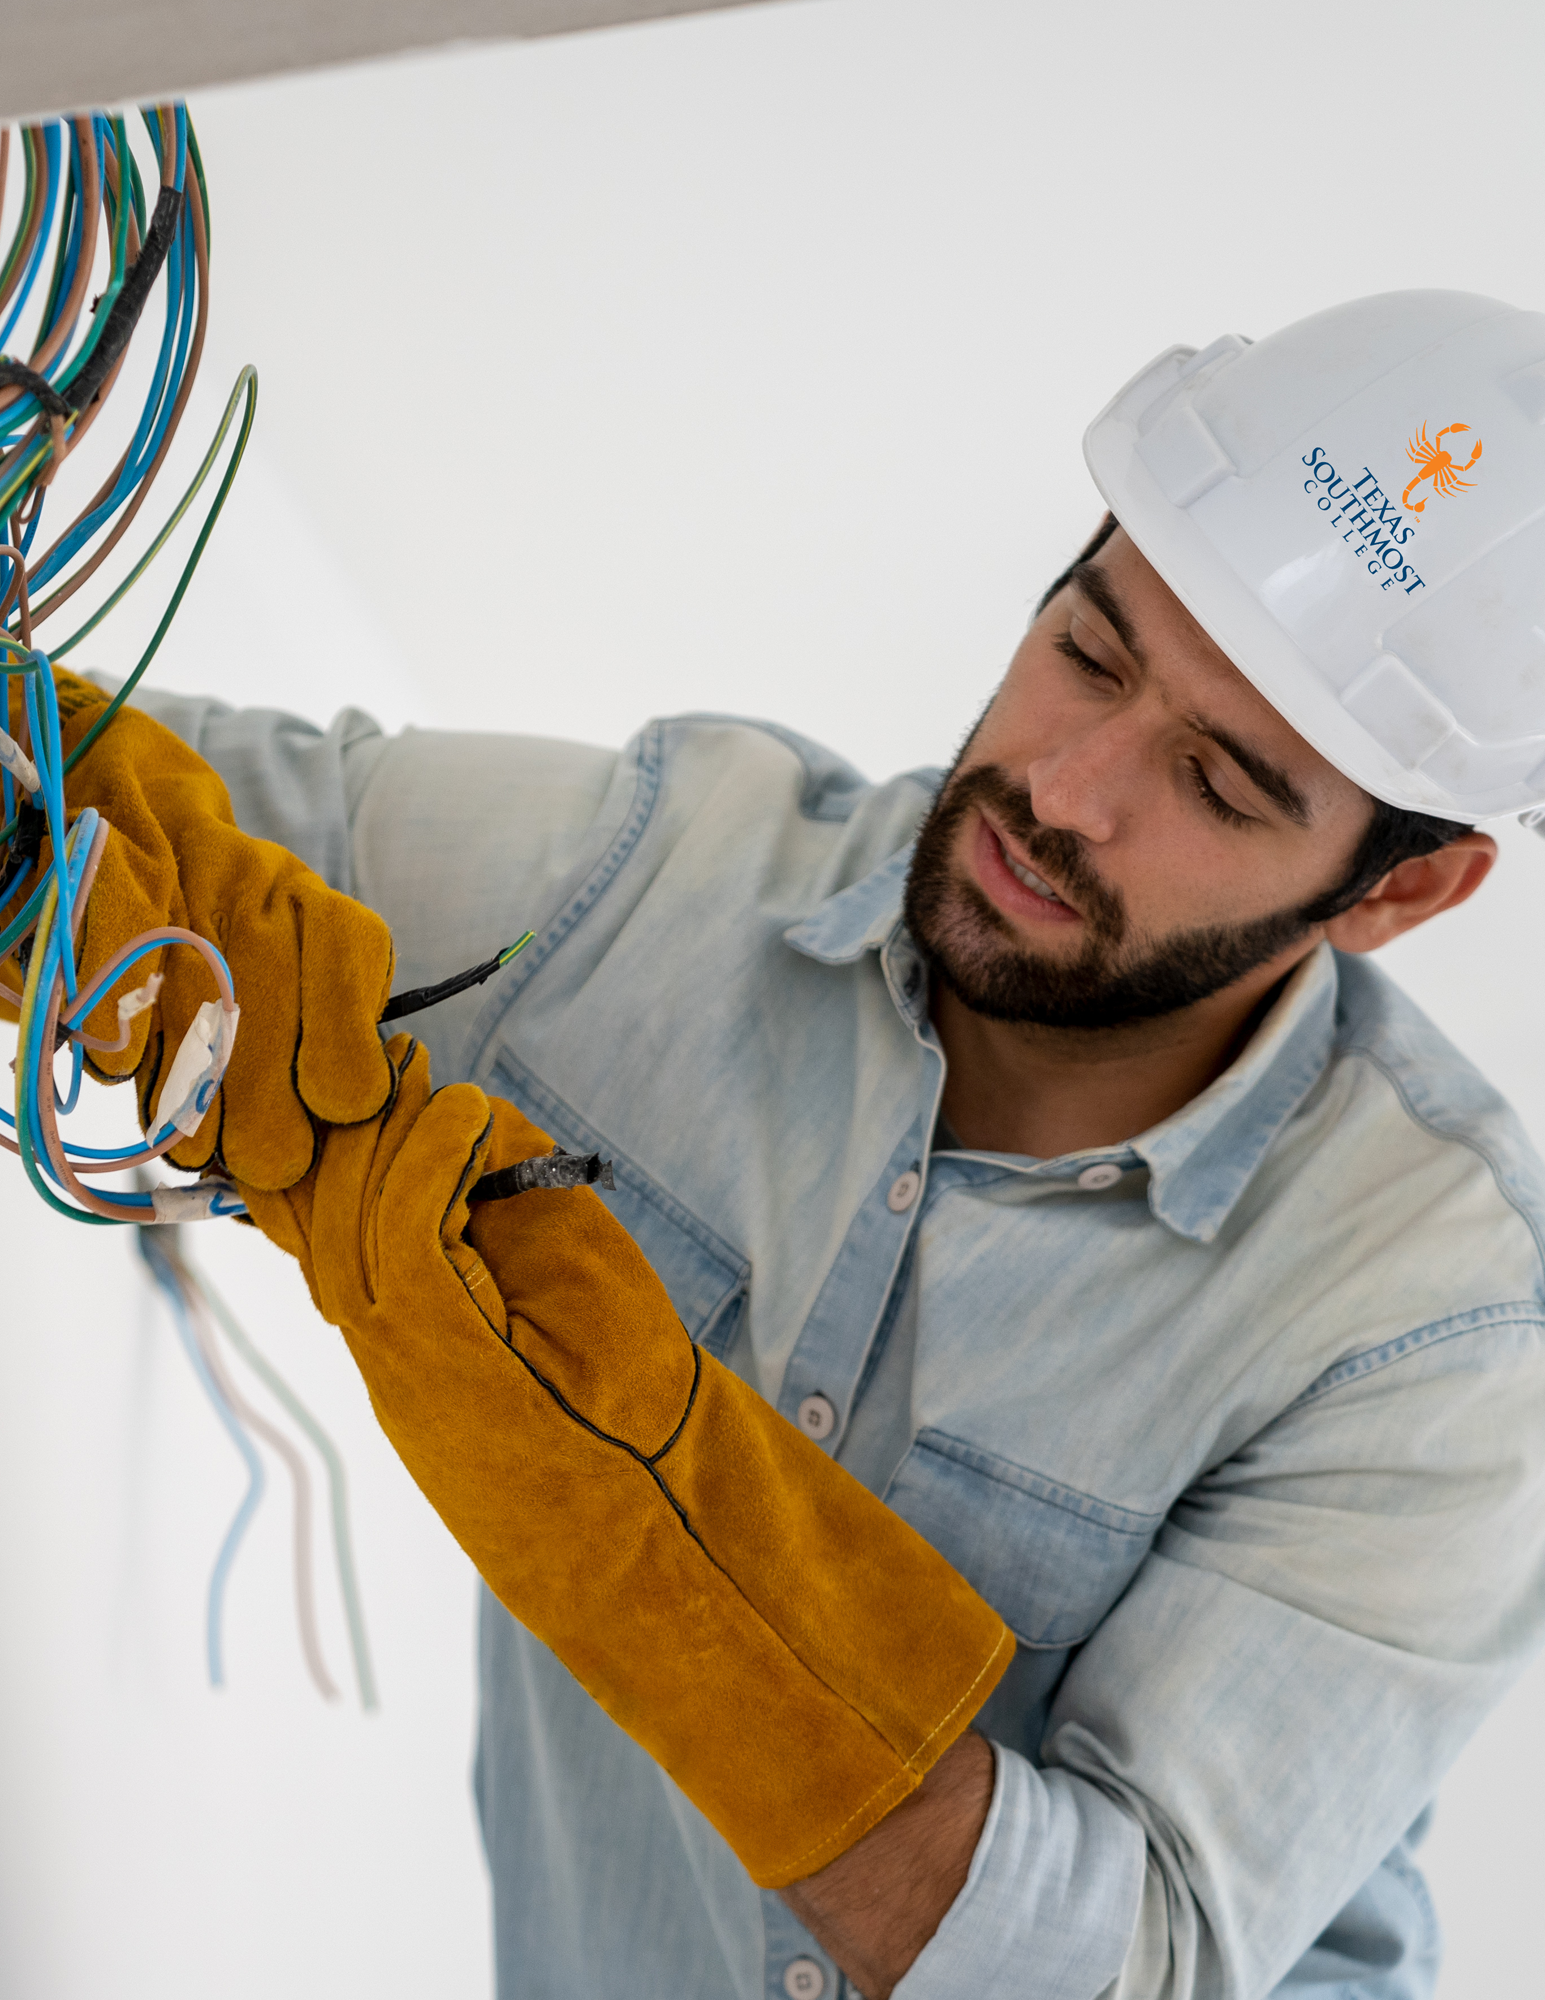 Texas Southmost College Commercial and Residential Electrician Program